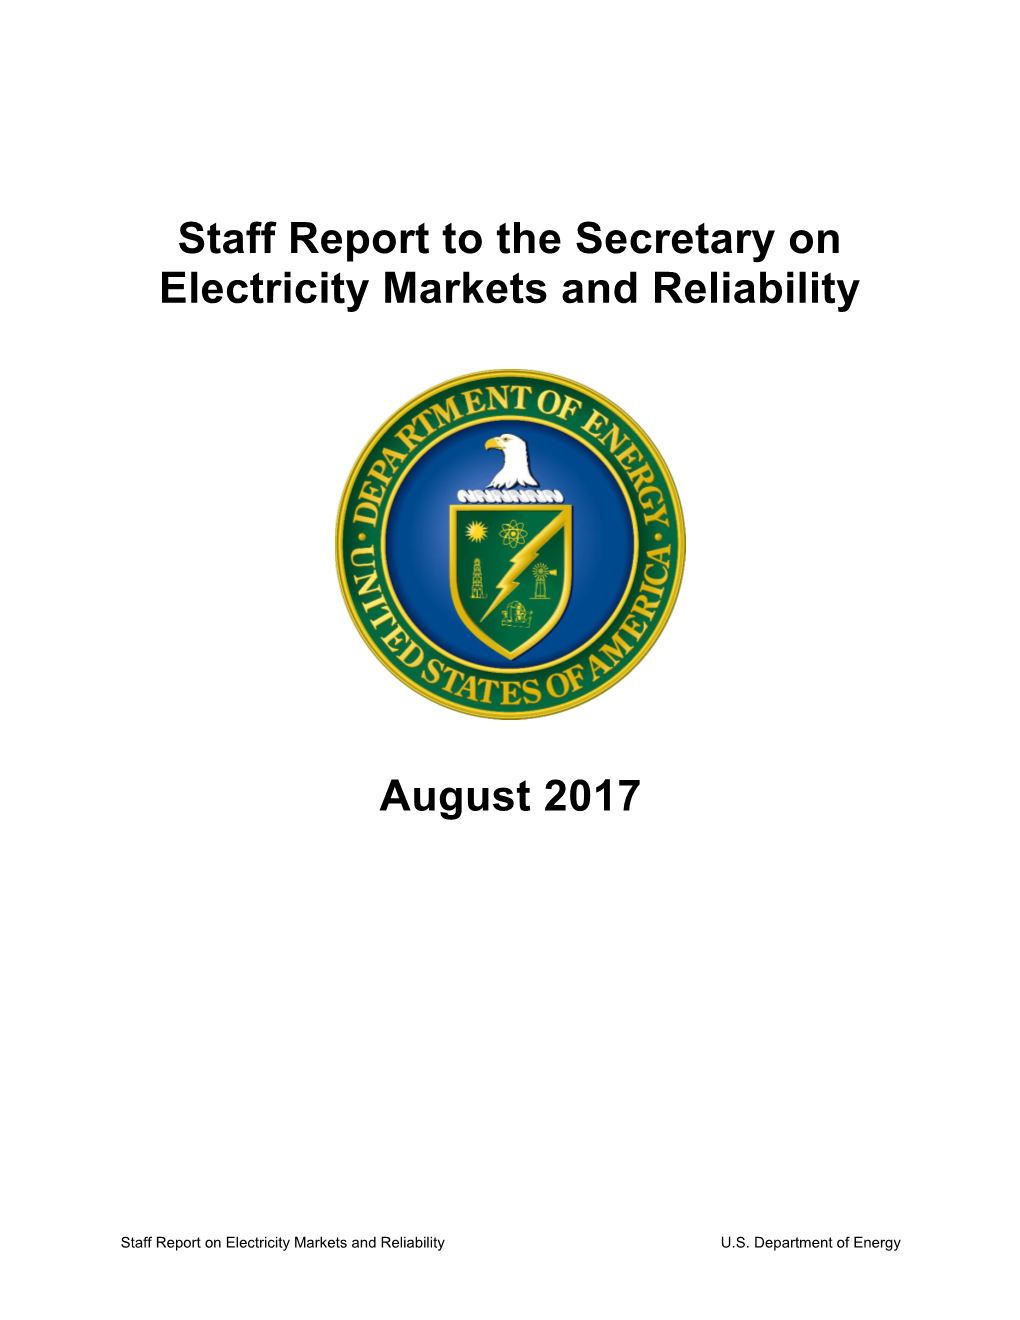 Staff Report to the Secretary on Electricity Markets and Reliability